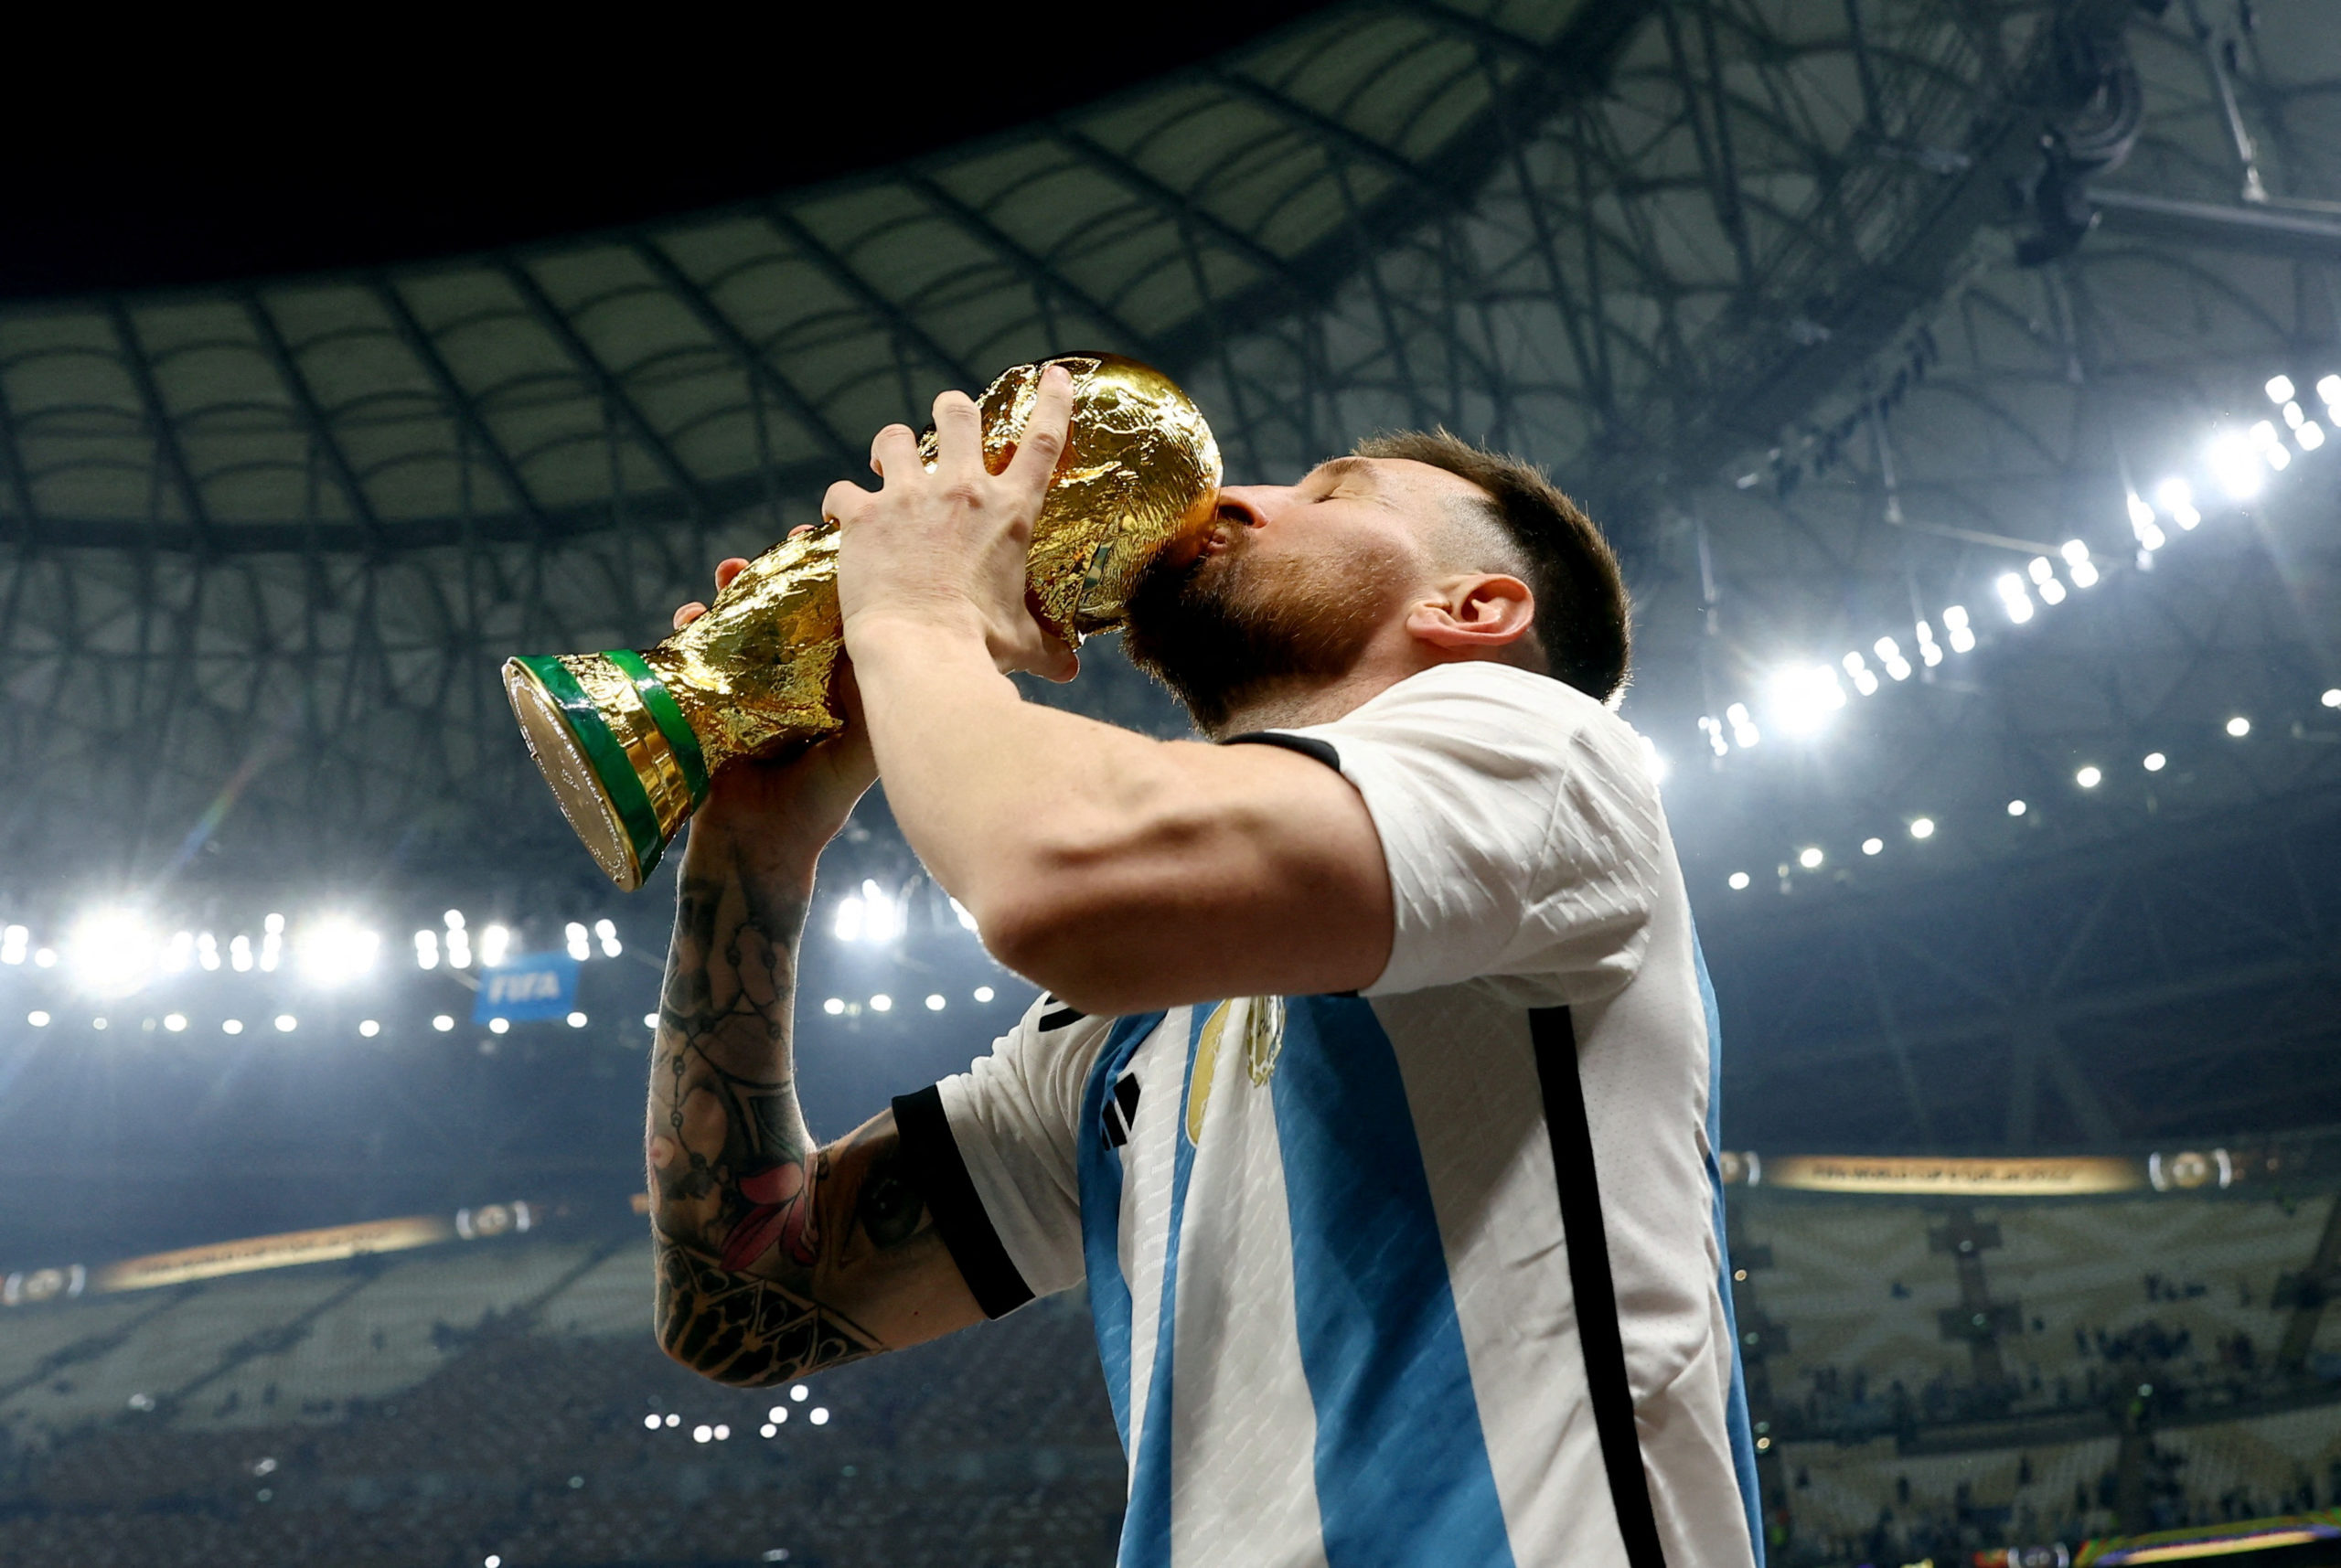 Lionel Messi Kisses His Trophy While Celebrating Win at FIFA World